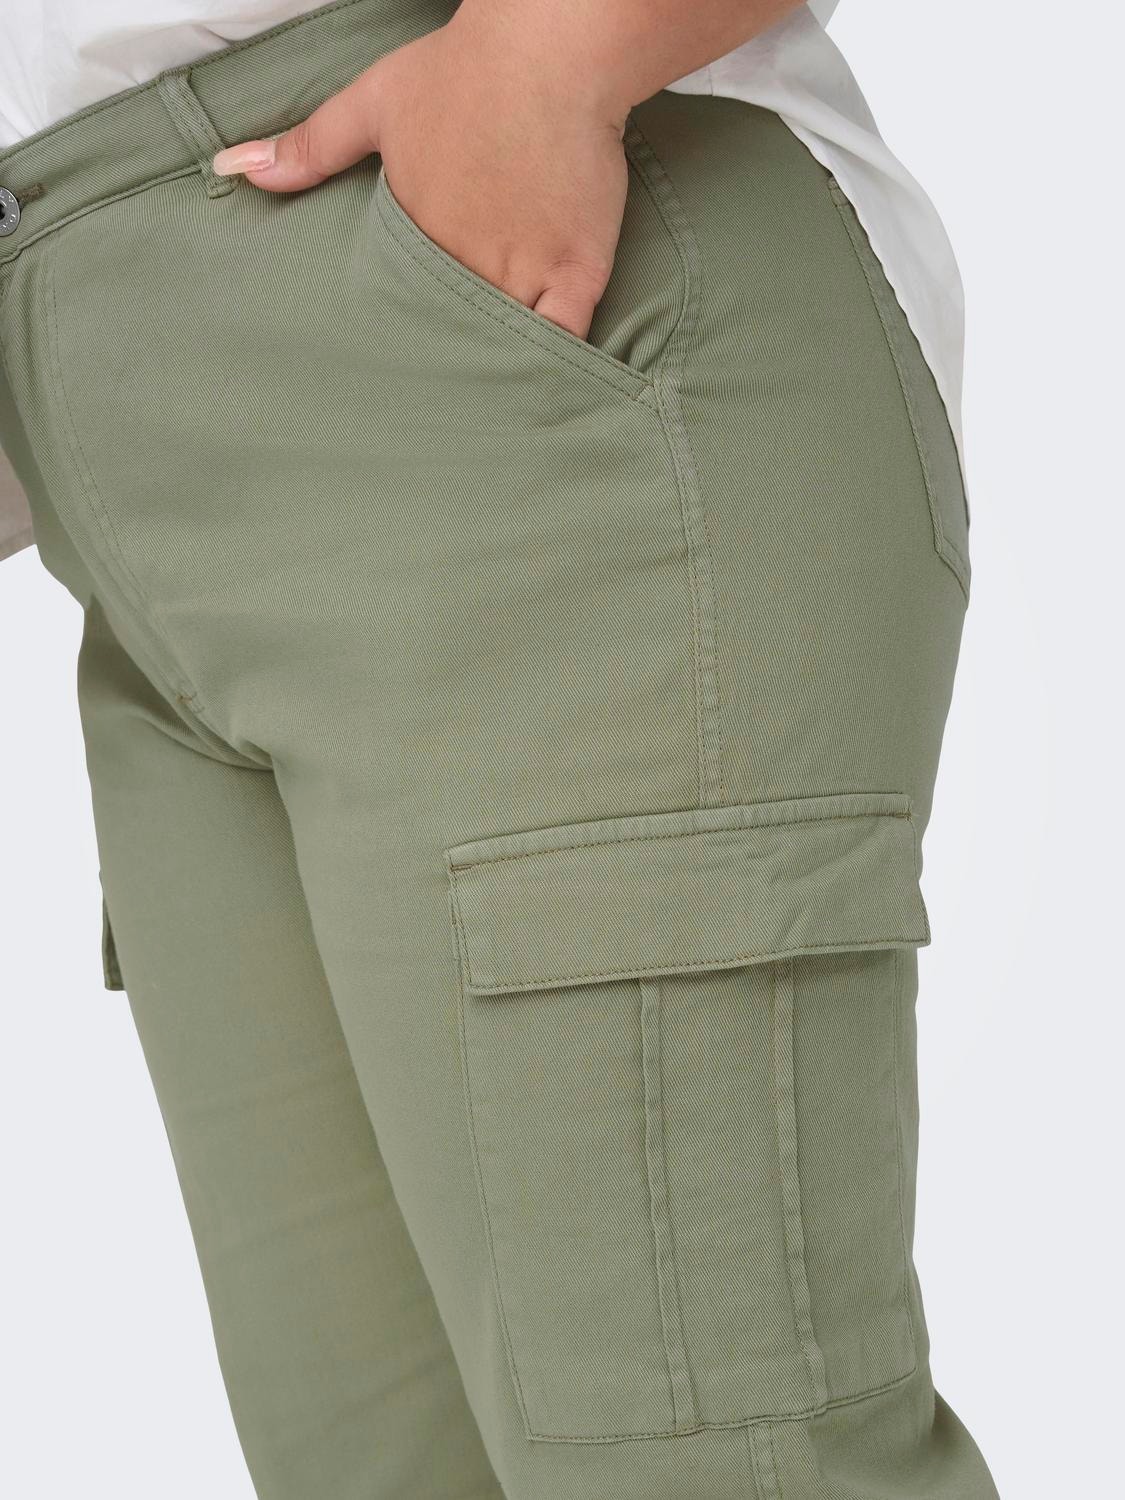 ONLY Curvy cargo trousers -Mermaid - 15300809